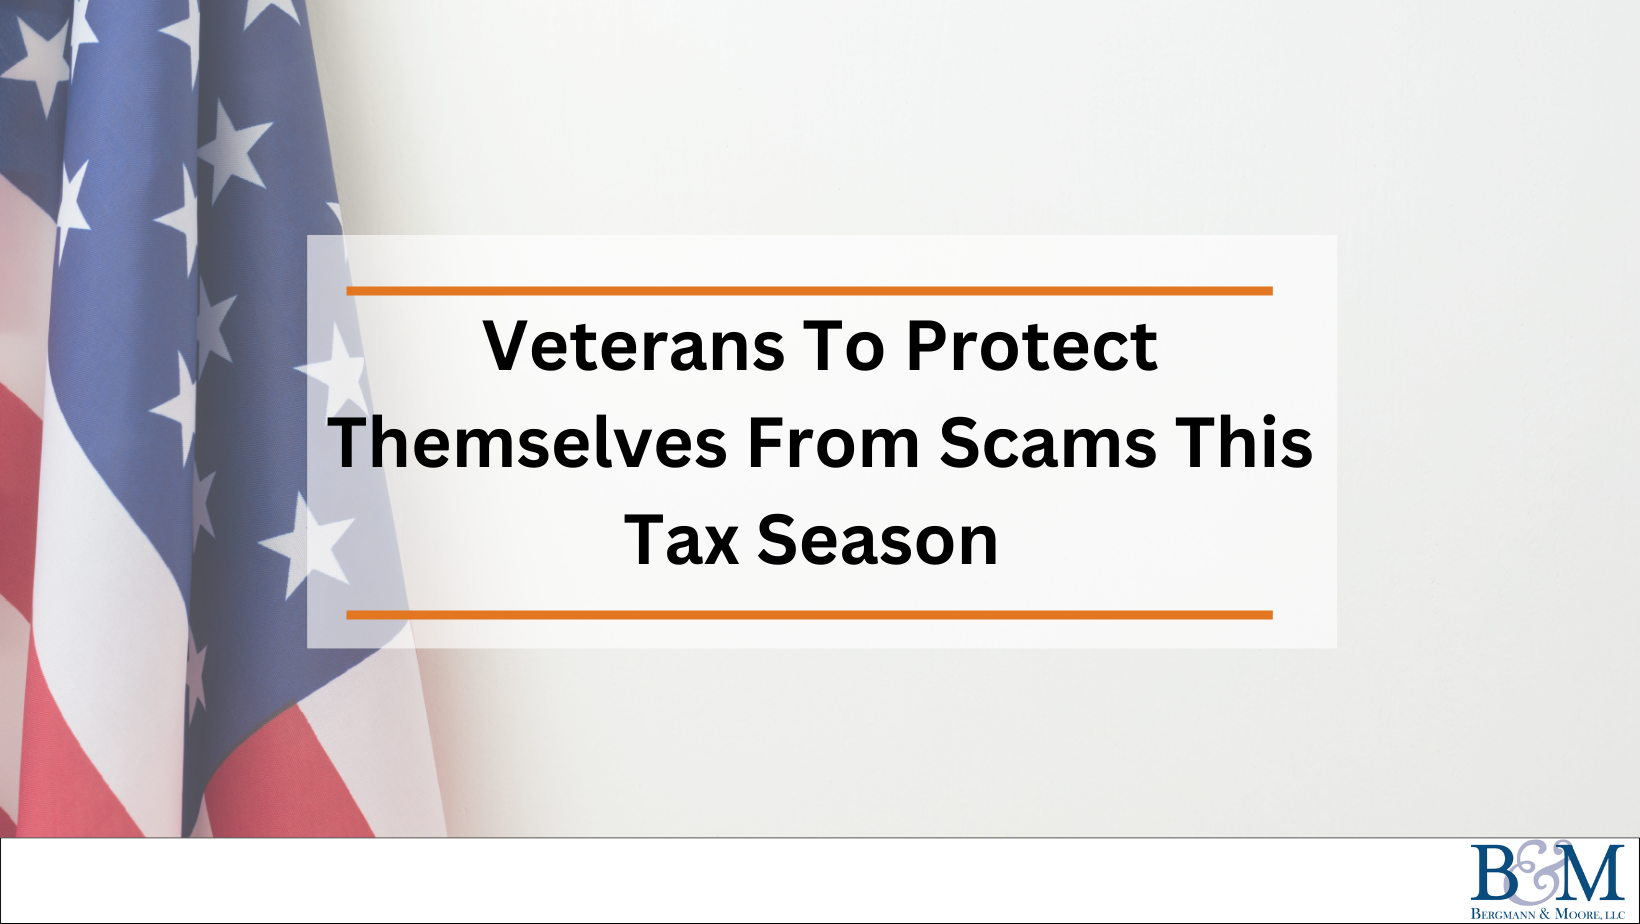 Veterans To Protect Themselves From Scams This Tax Season